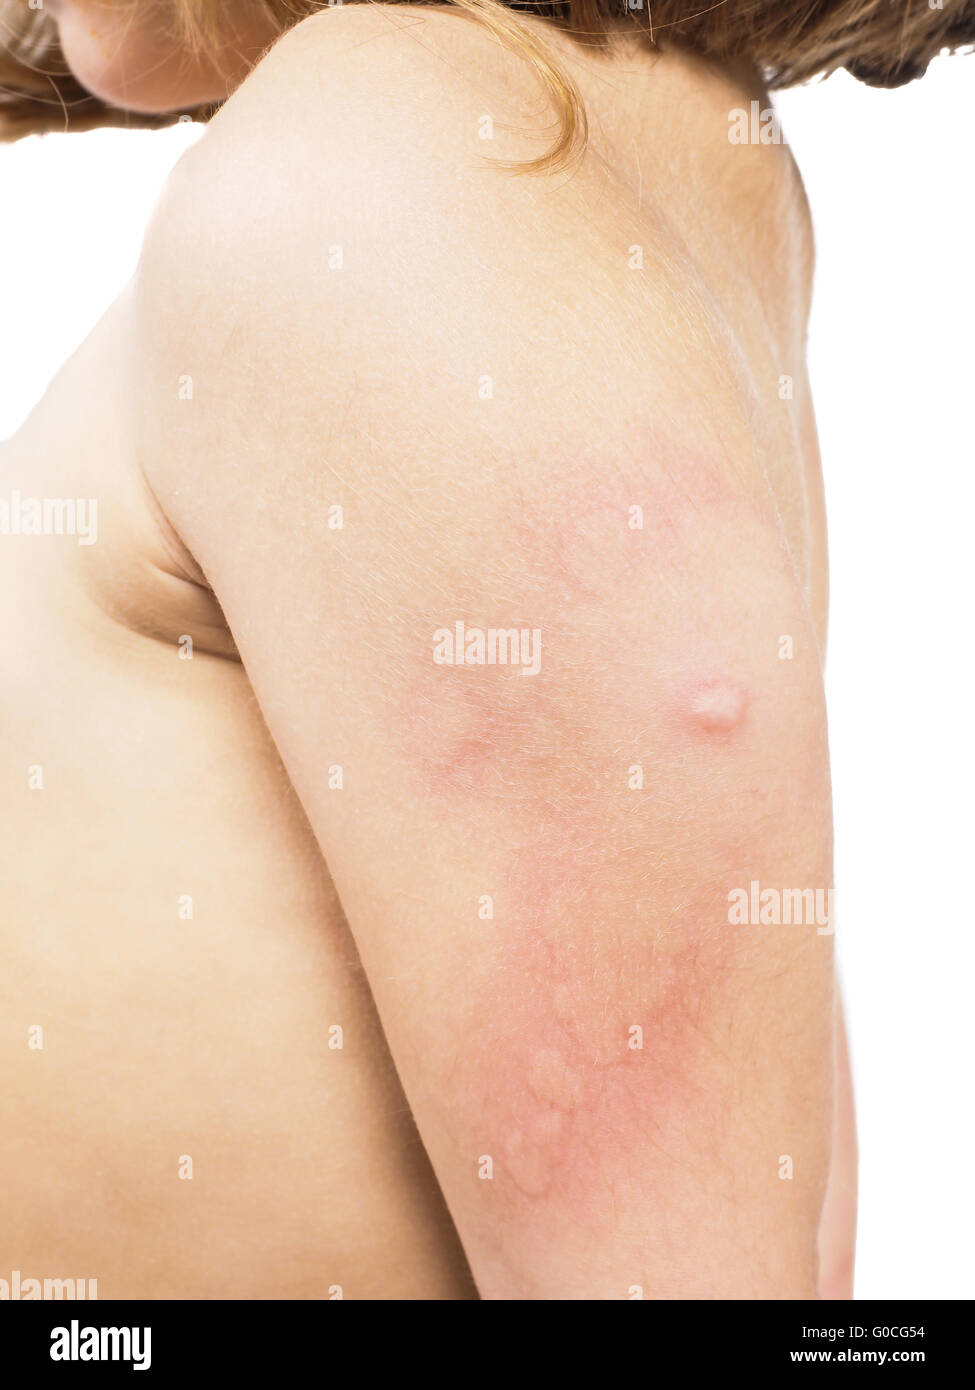 Red colored rash on skin of child Stock Photo